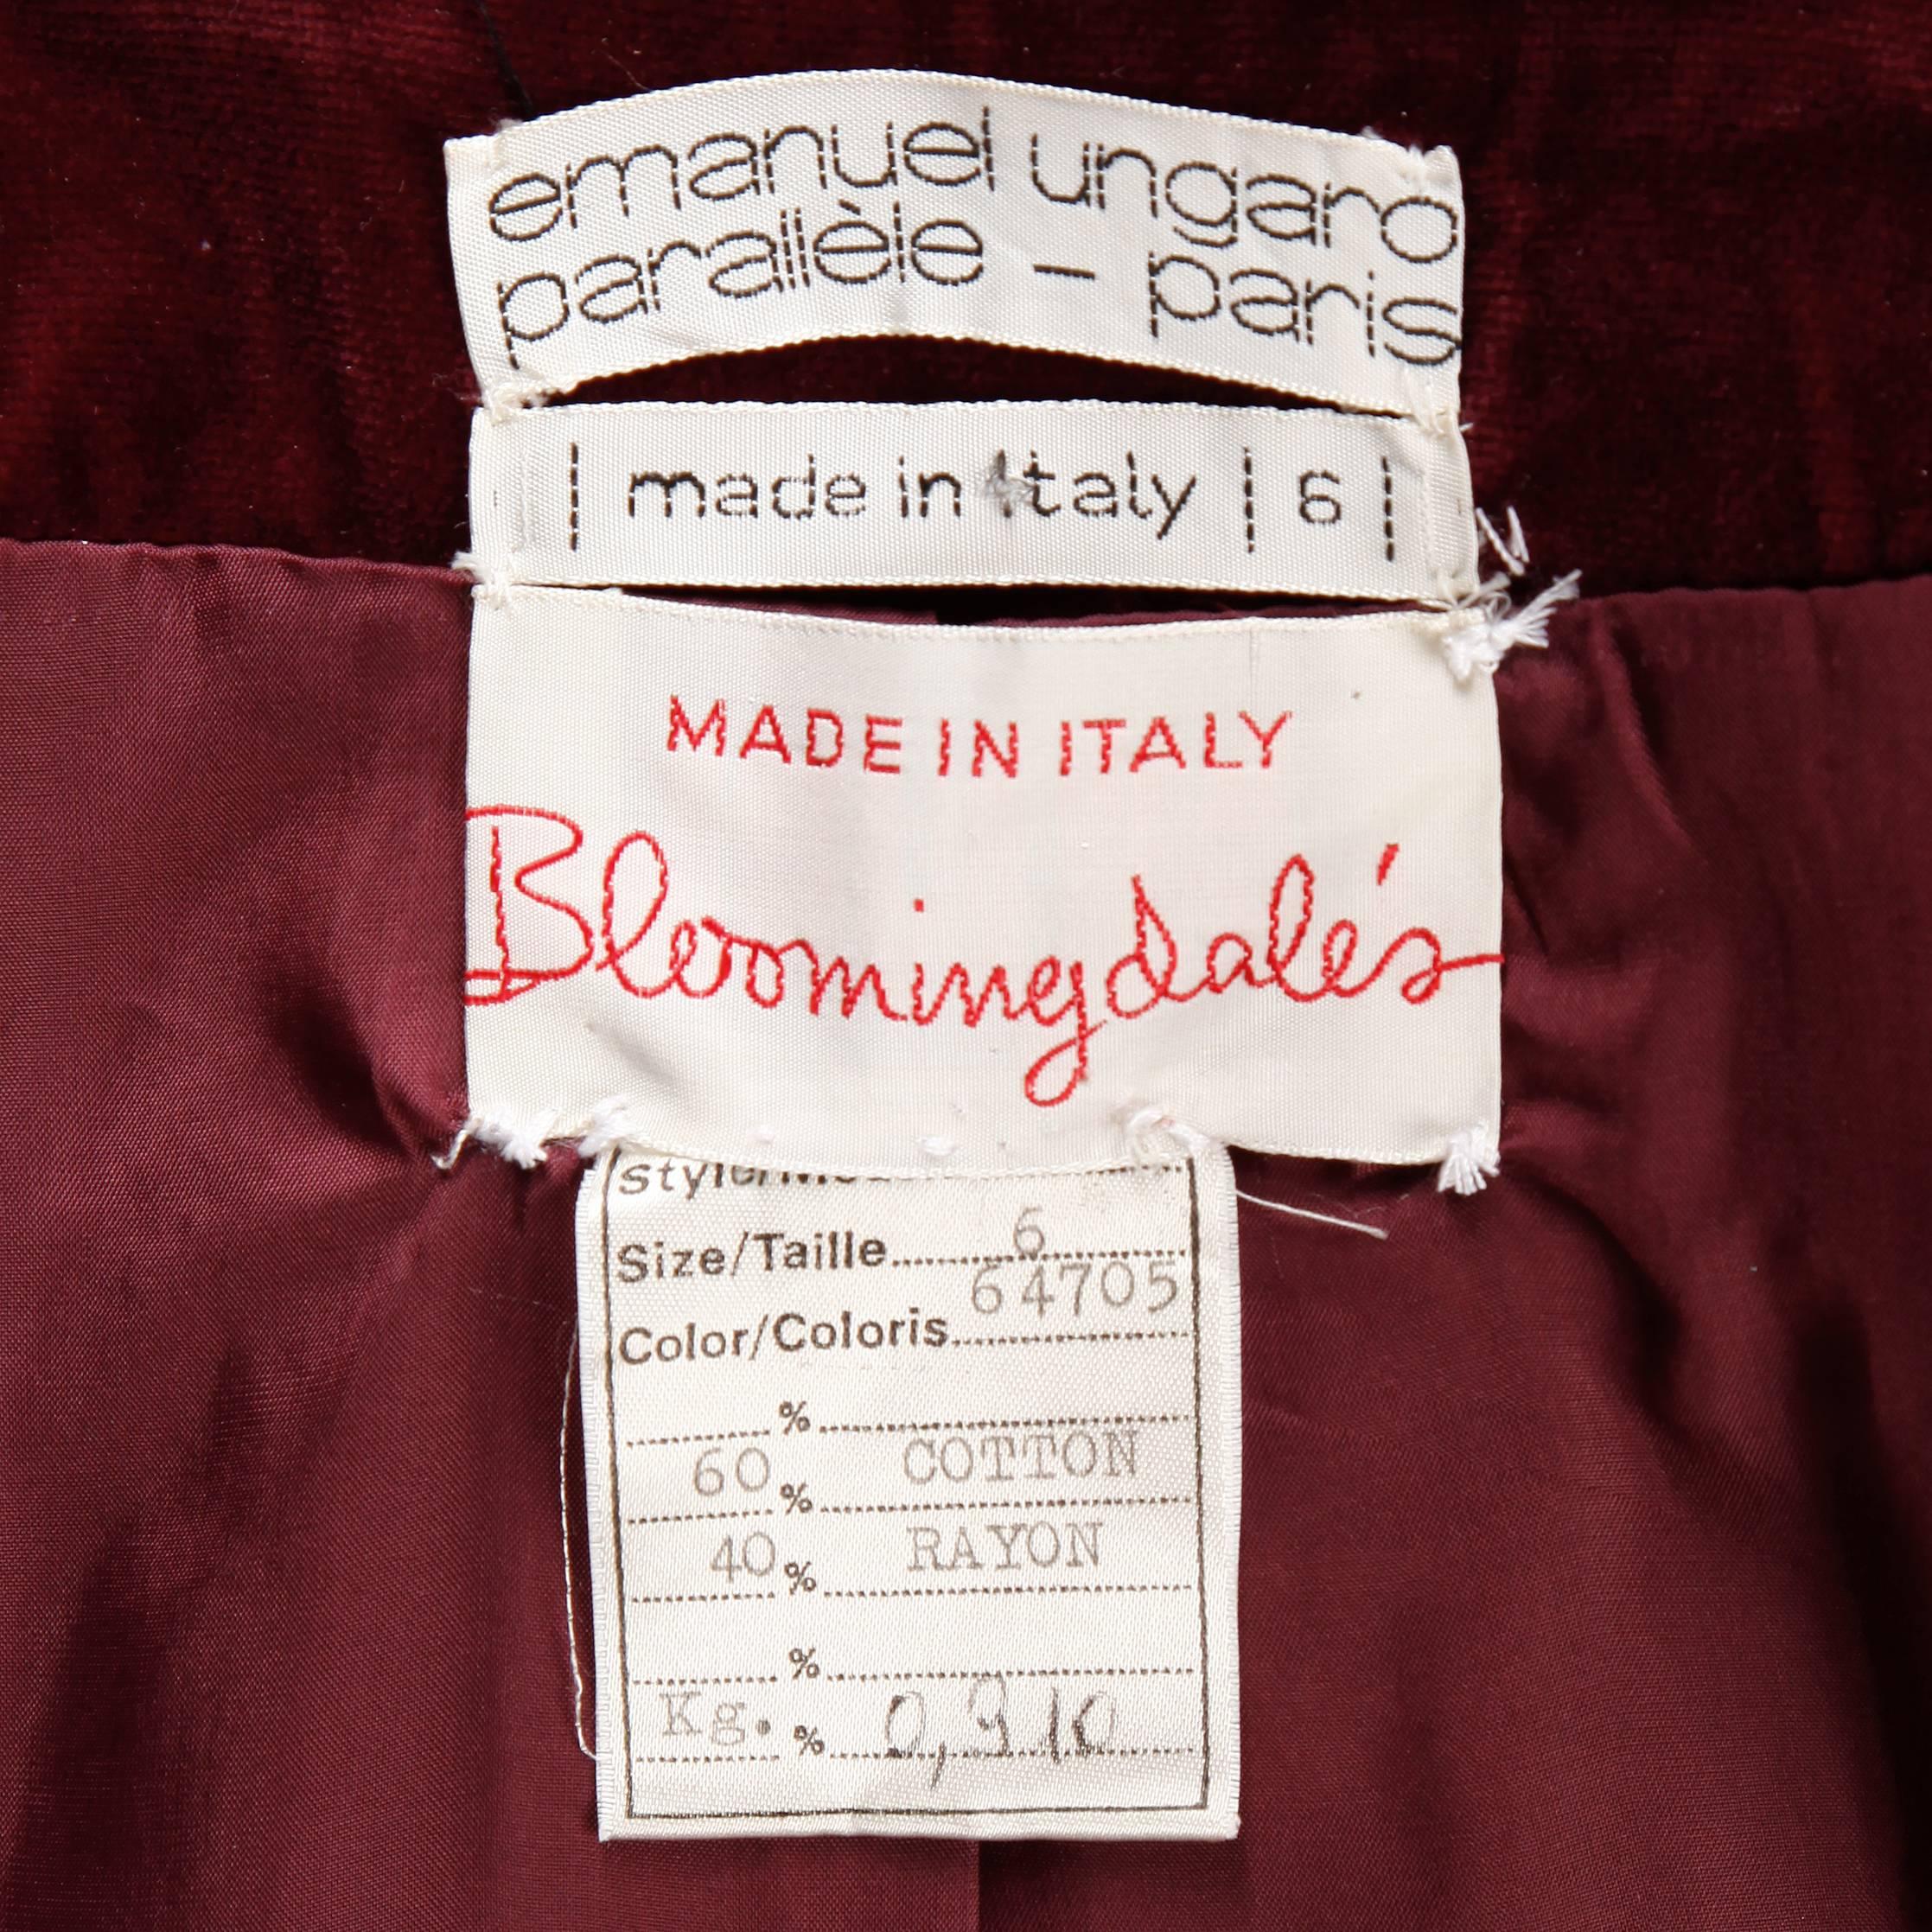 Rare 1970s Emanuel Ungaro Parallele label! Gorgeous burgundy rayon/ cotton blend velvet with matching waist sash and burgundy enamel buttons. Love the structured pointed collar and the full sleeves. Side pockets. Fully lined. The marked size is a US